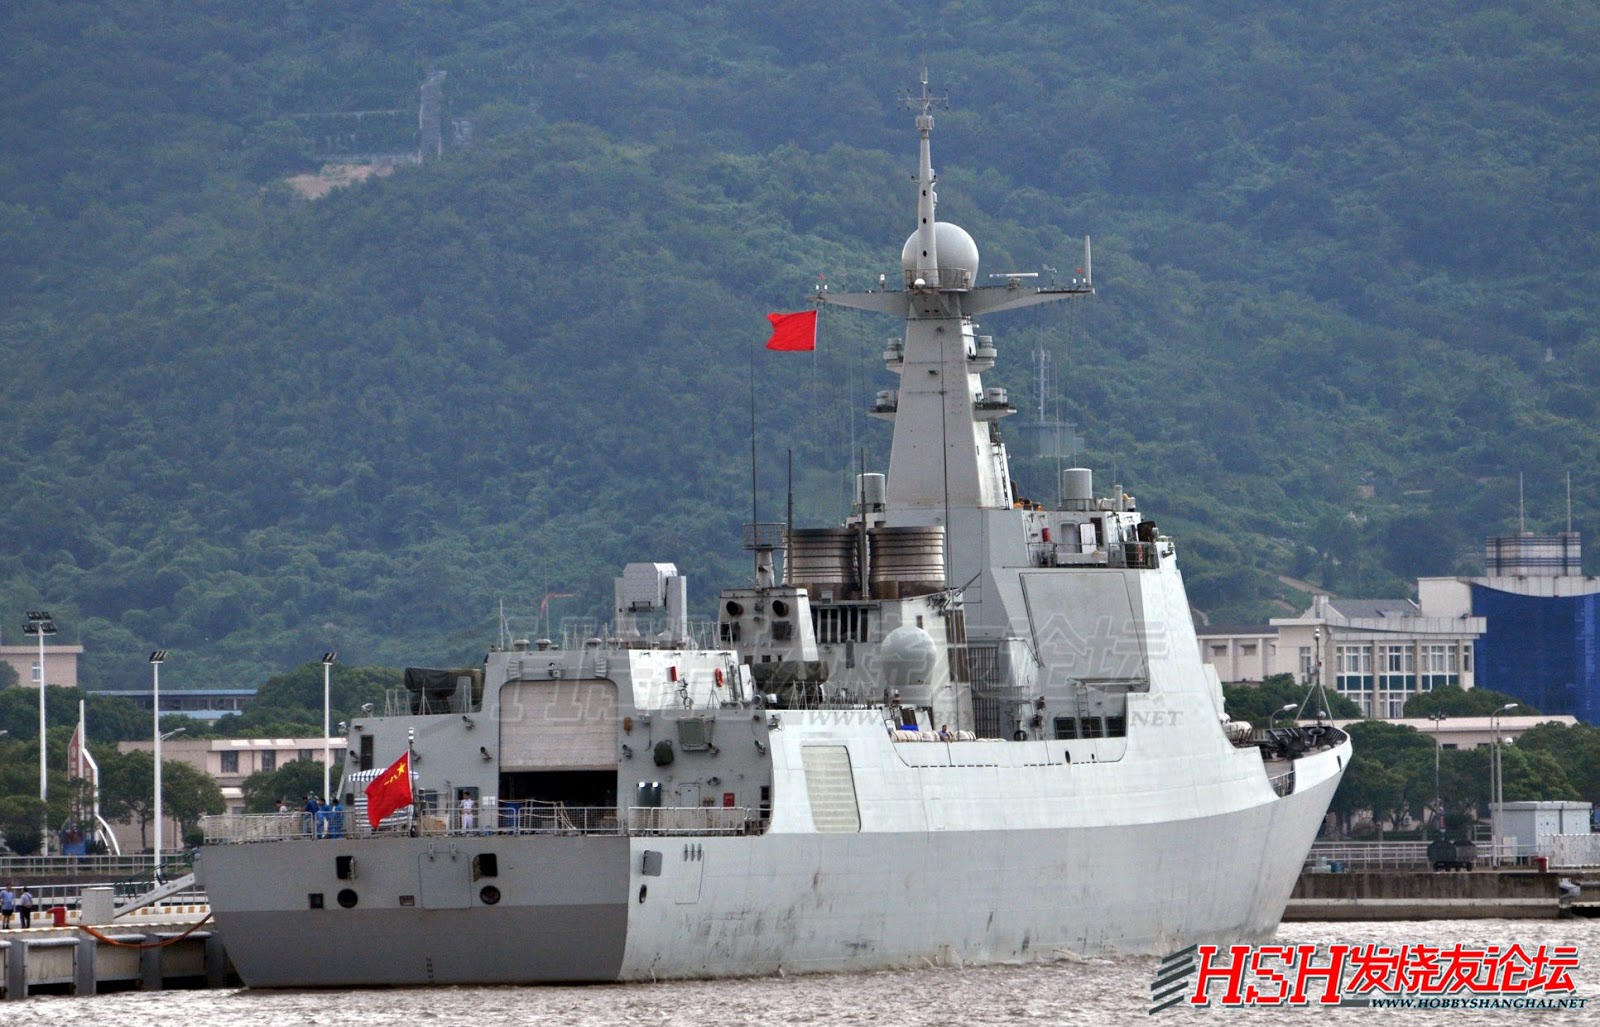 ARMADA DE CHINA - Página 2 Type+052D+Guided+Missile+Destroyer,+Type+052C+,+Peoples+Liberation+Army+Navy,+China,+Zhoushan+naval+base+5+Type+052C+Type+052D+destroyers+built+055+056+naval+missile+antiship+aesa+radar+hhq-9+hhq-16+(5)